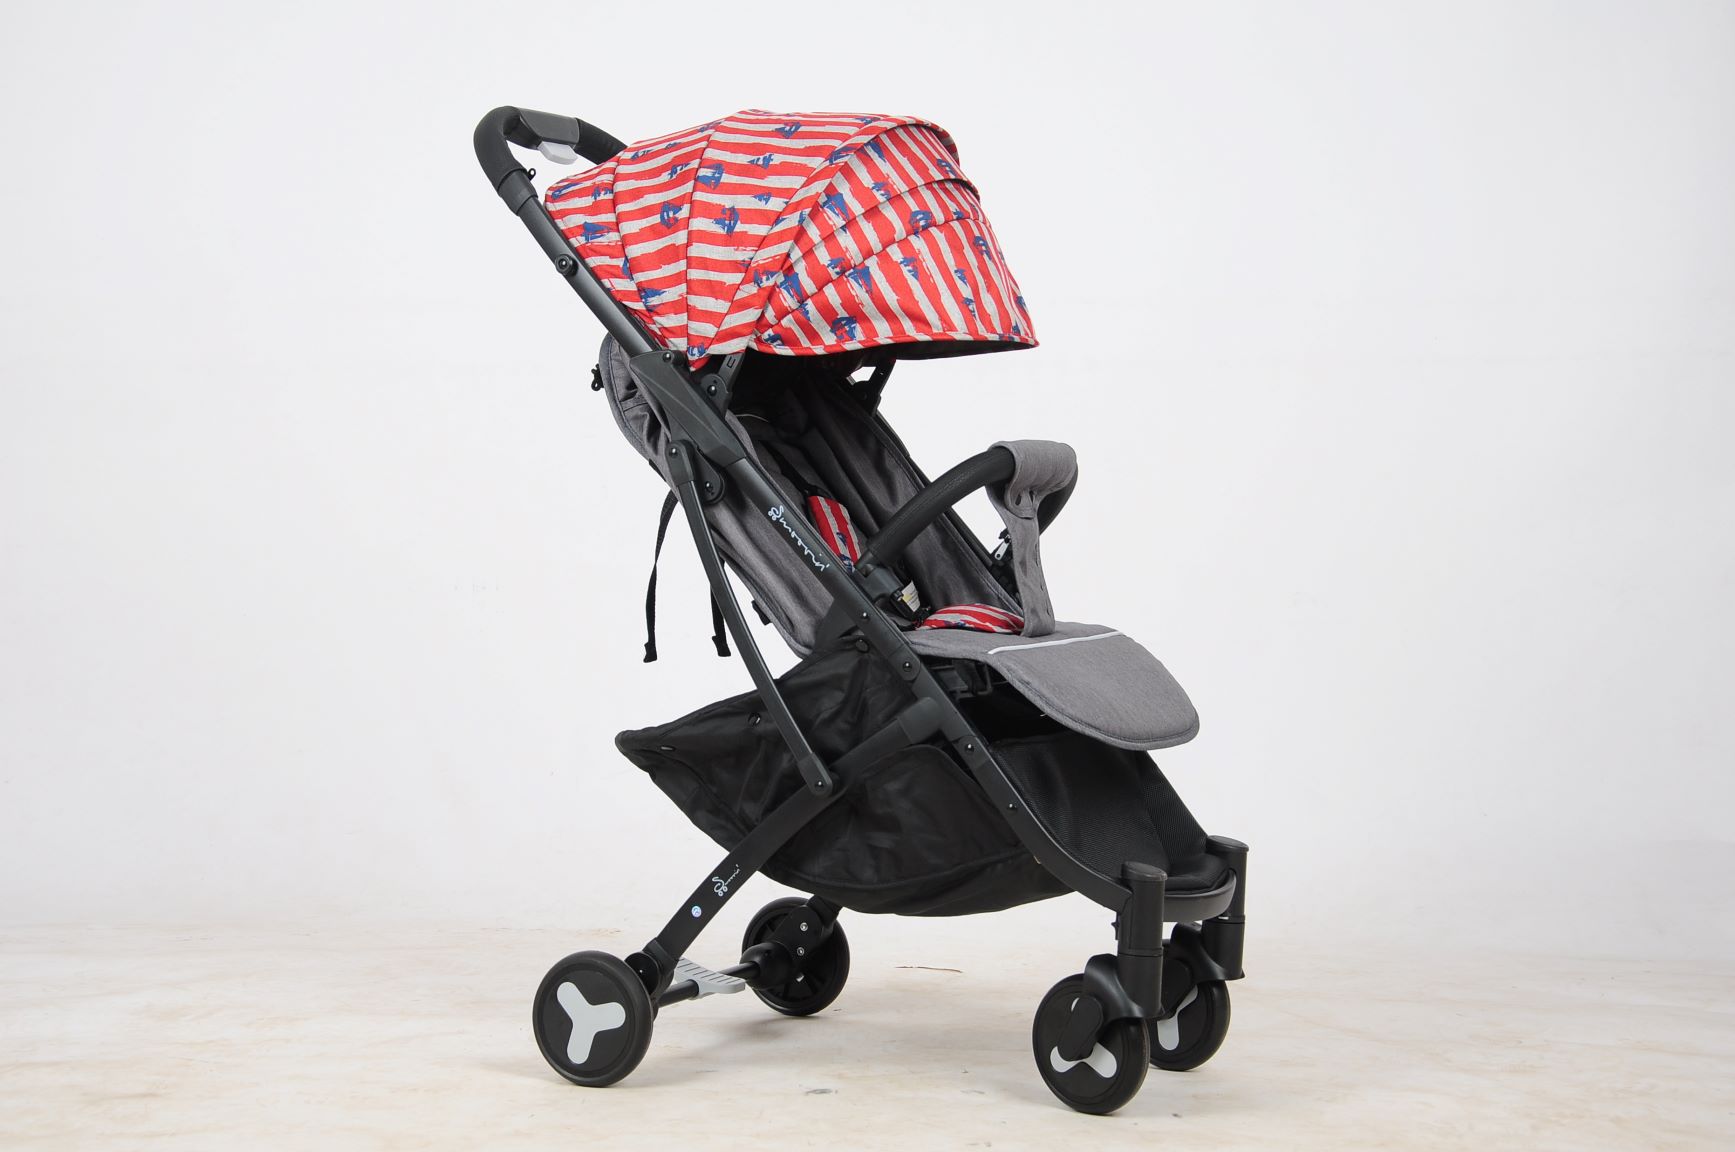 Bunny Bubbles Baby Co. - Smoovin' Compact Travel Stroller (4561677942818)